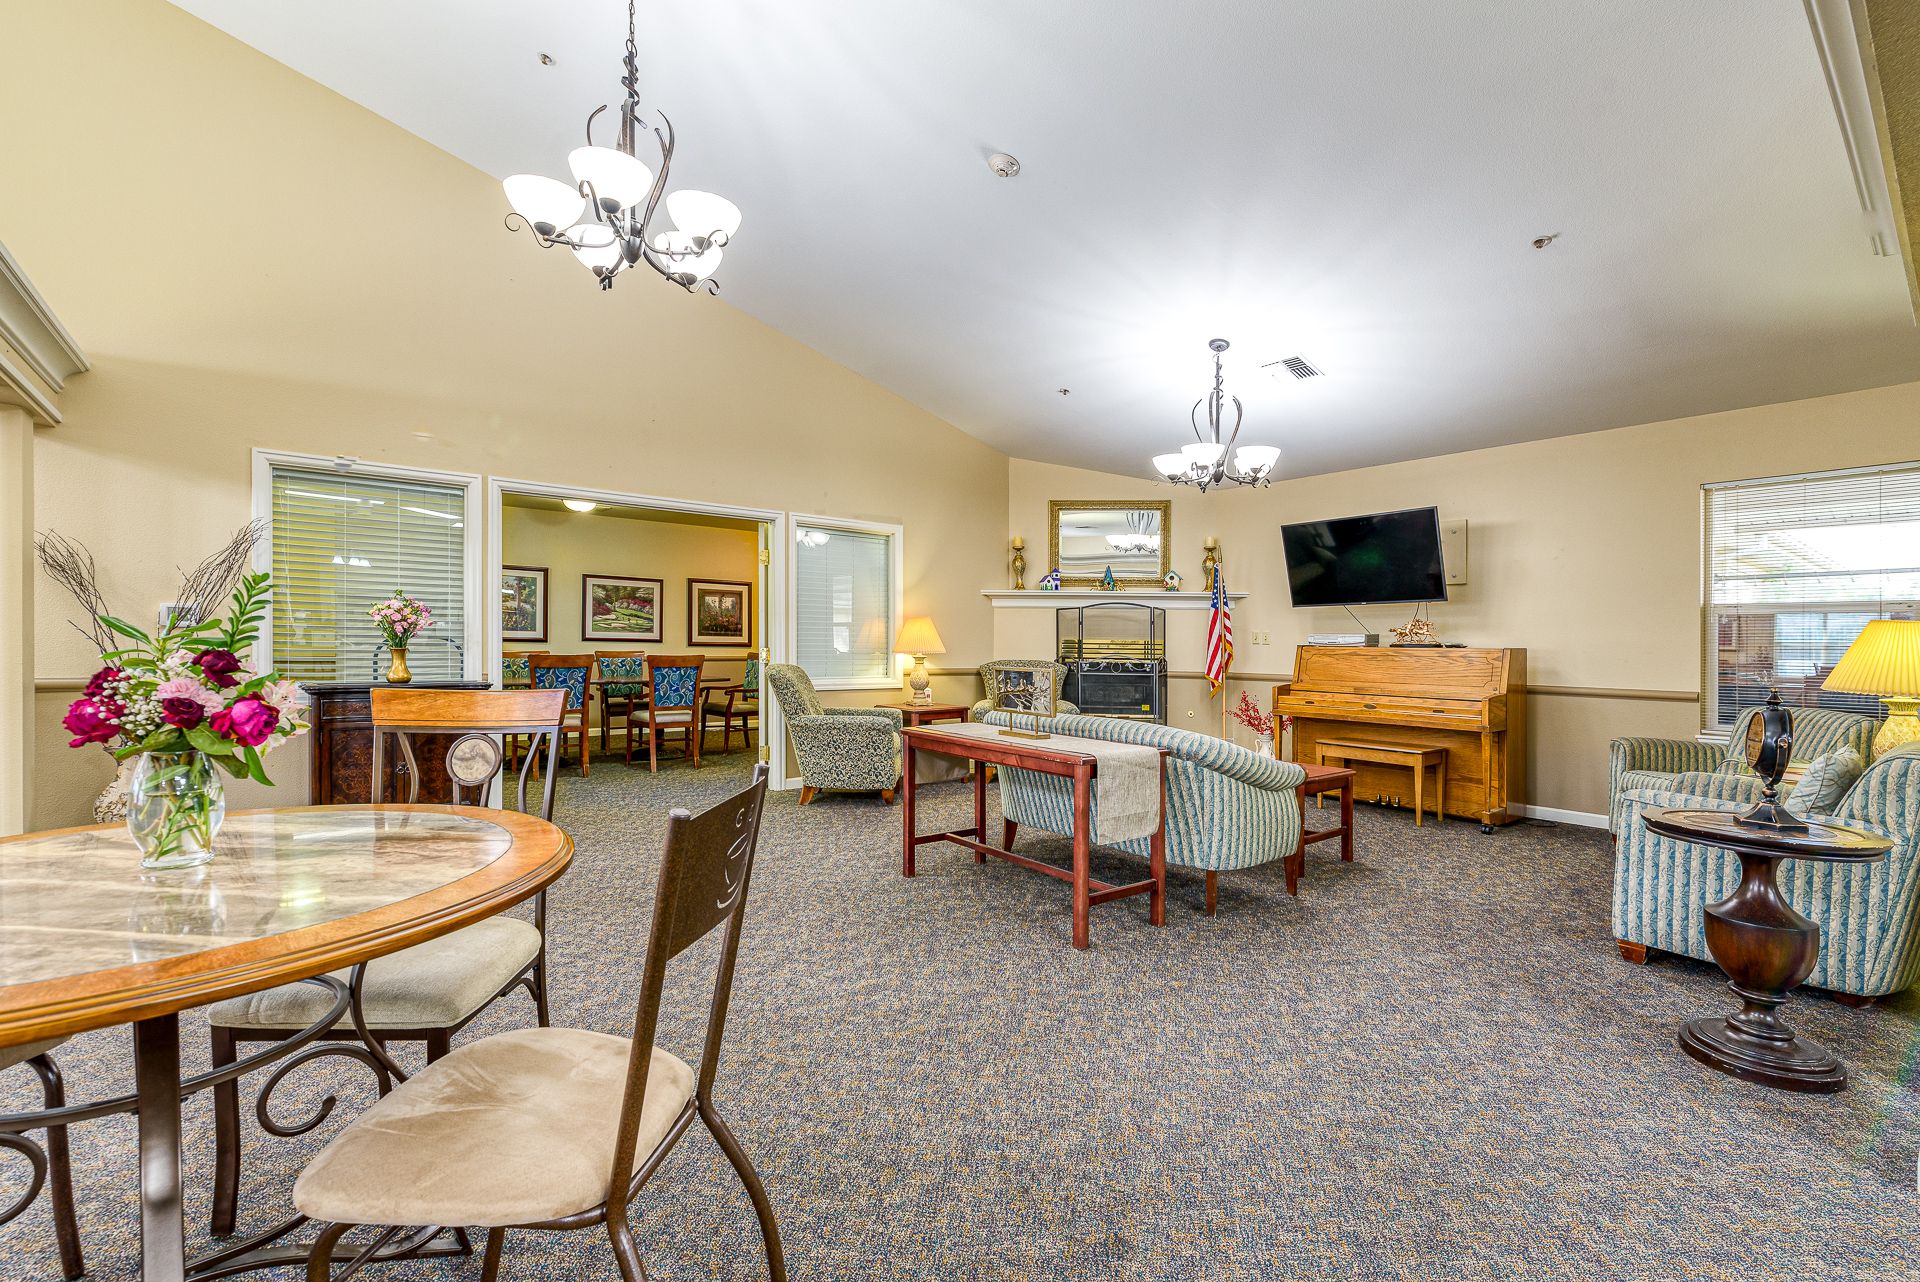 Awbrey Place Assisted Living and Memory Care 4